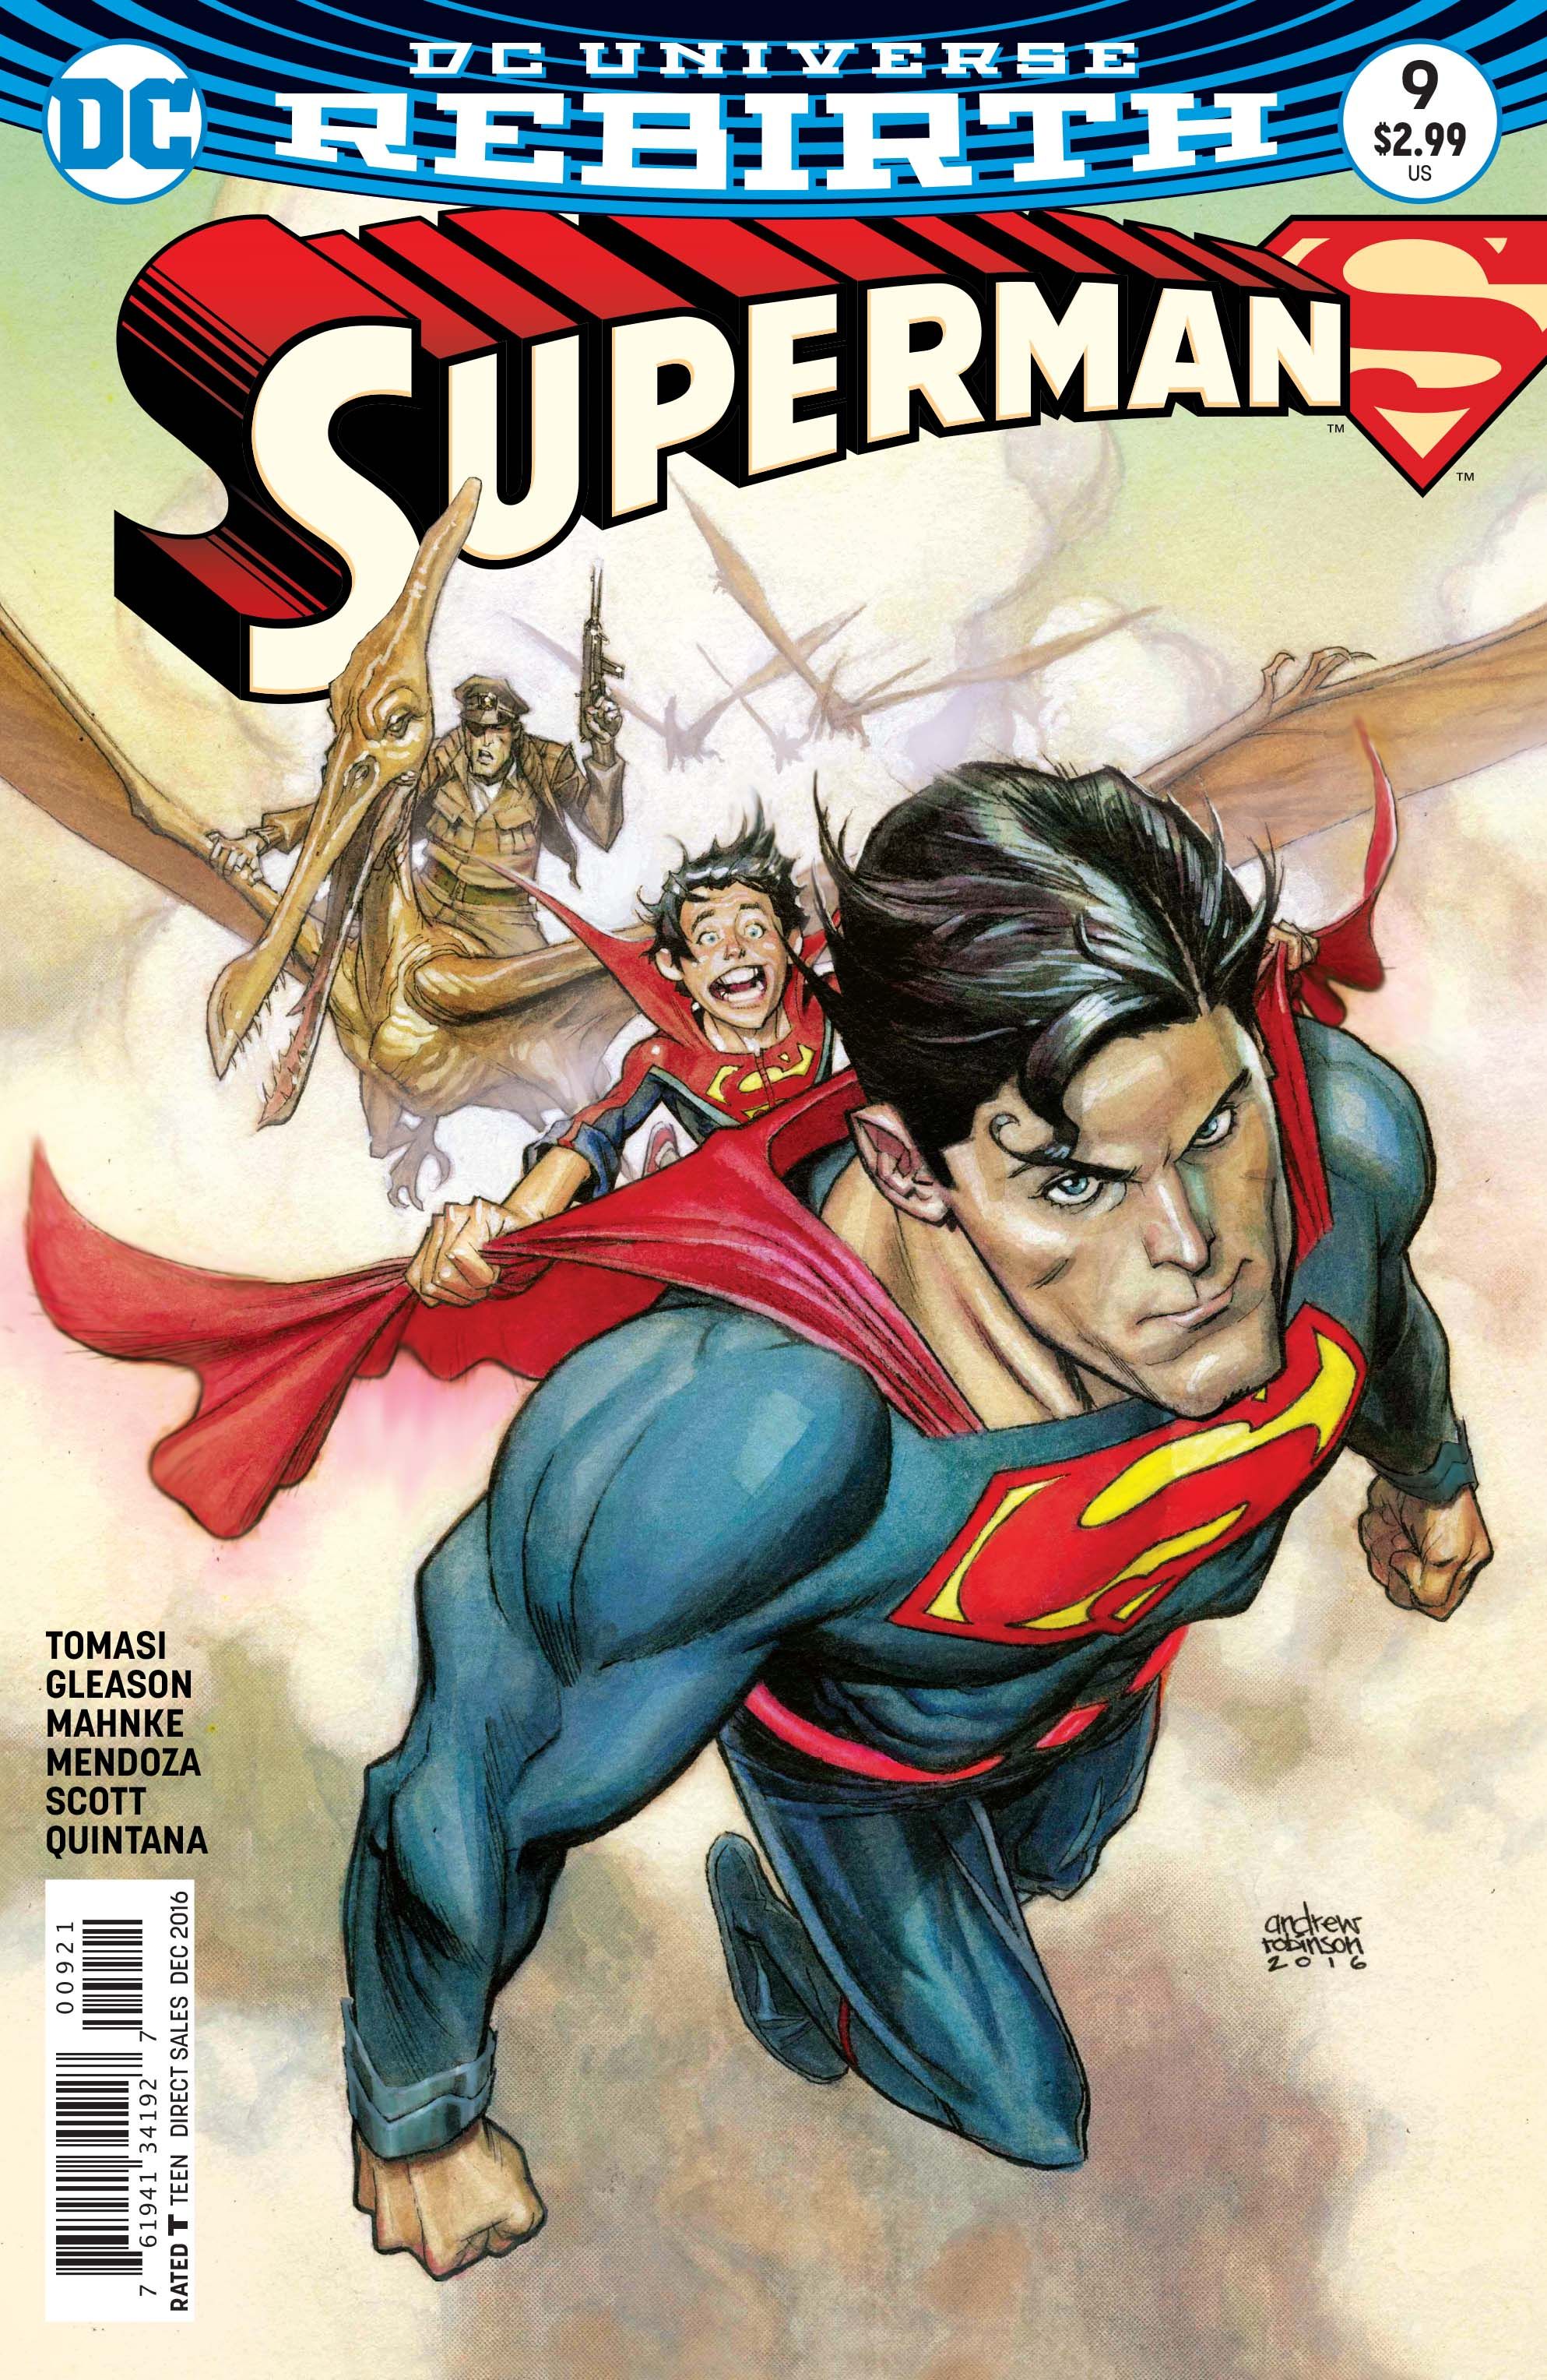 Superman #9 (EXCLUSIVE PREVIEW)